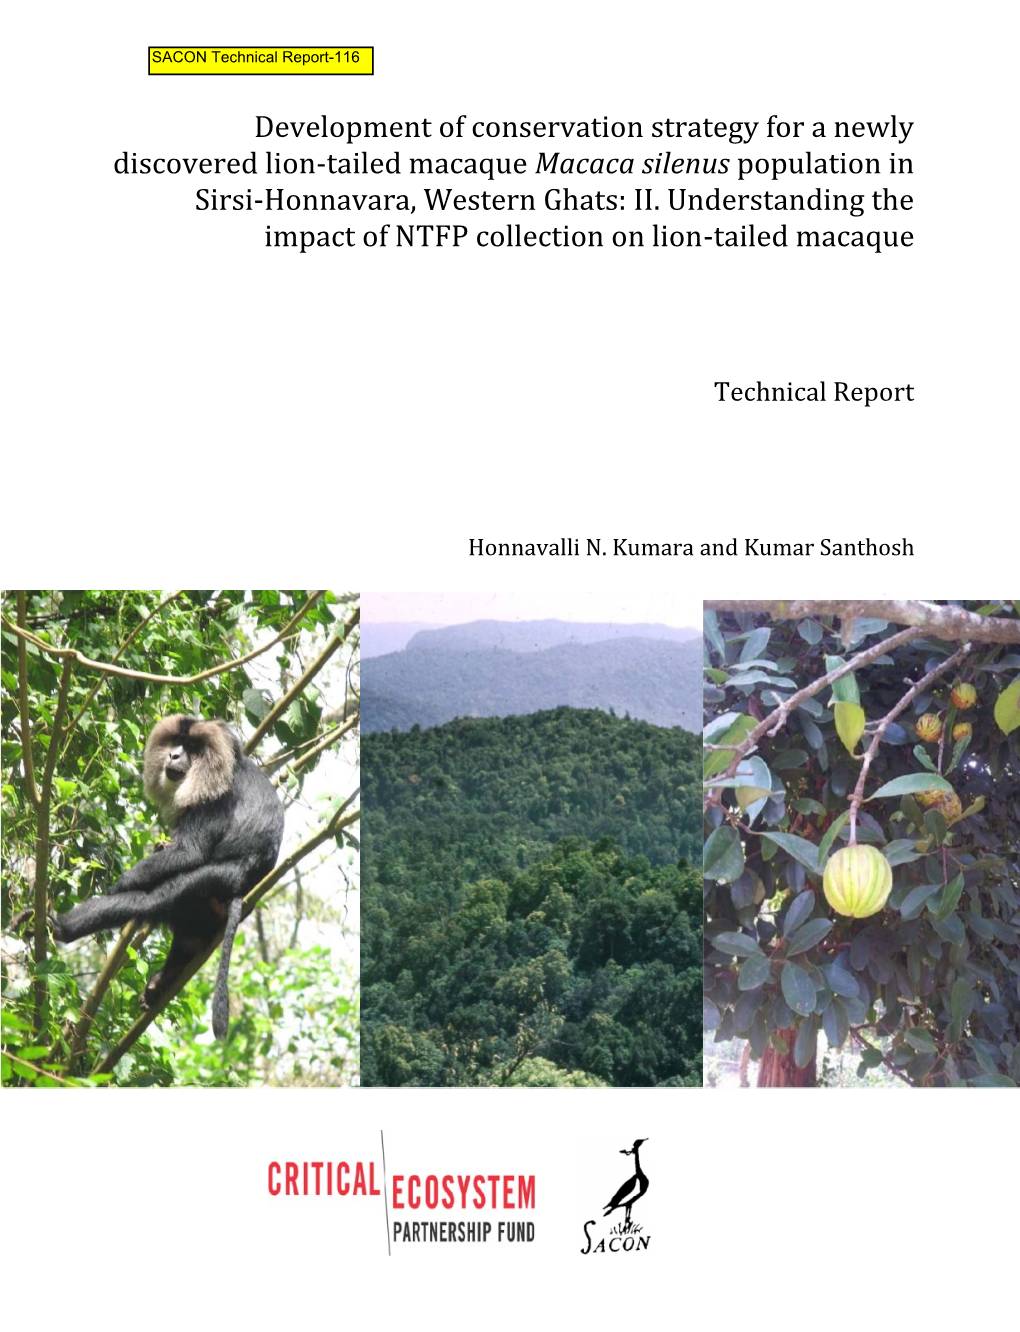 Development of Conservation Strategy for a Newly Discovered Lion-Tailed Macaque Population in Sirsi-Honnavara, Western Ghats: II